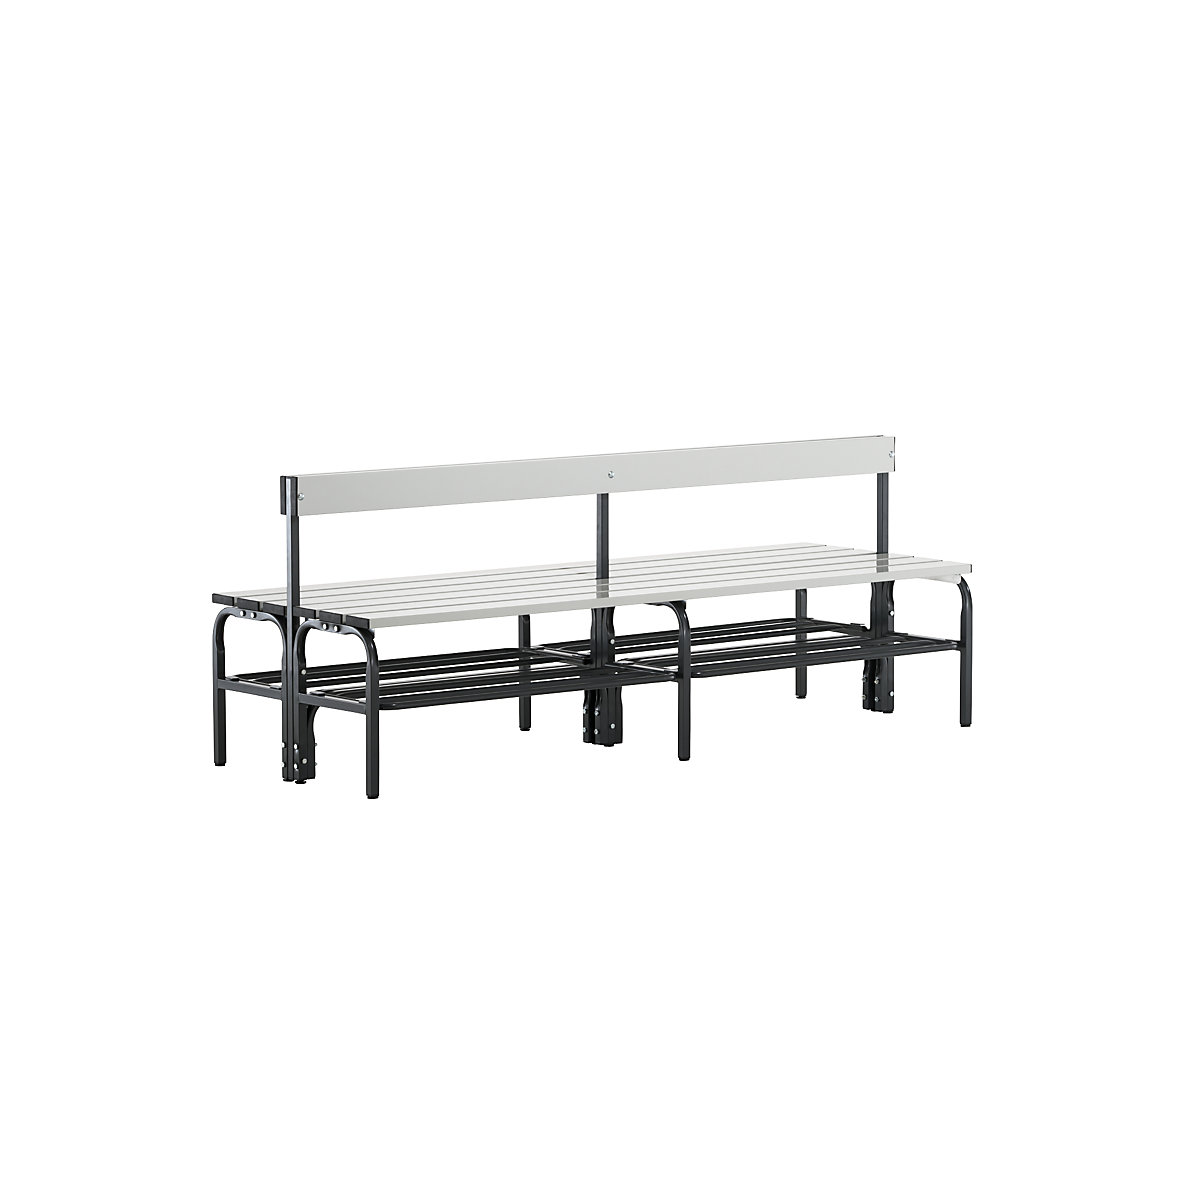 Sypro – Half height cloakroom bench with back rest, double sided, aluminium, length 2000 mm, charcoal, shoe rack